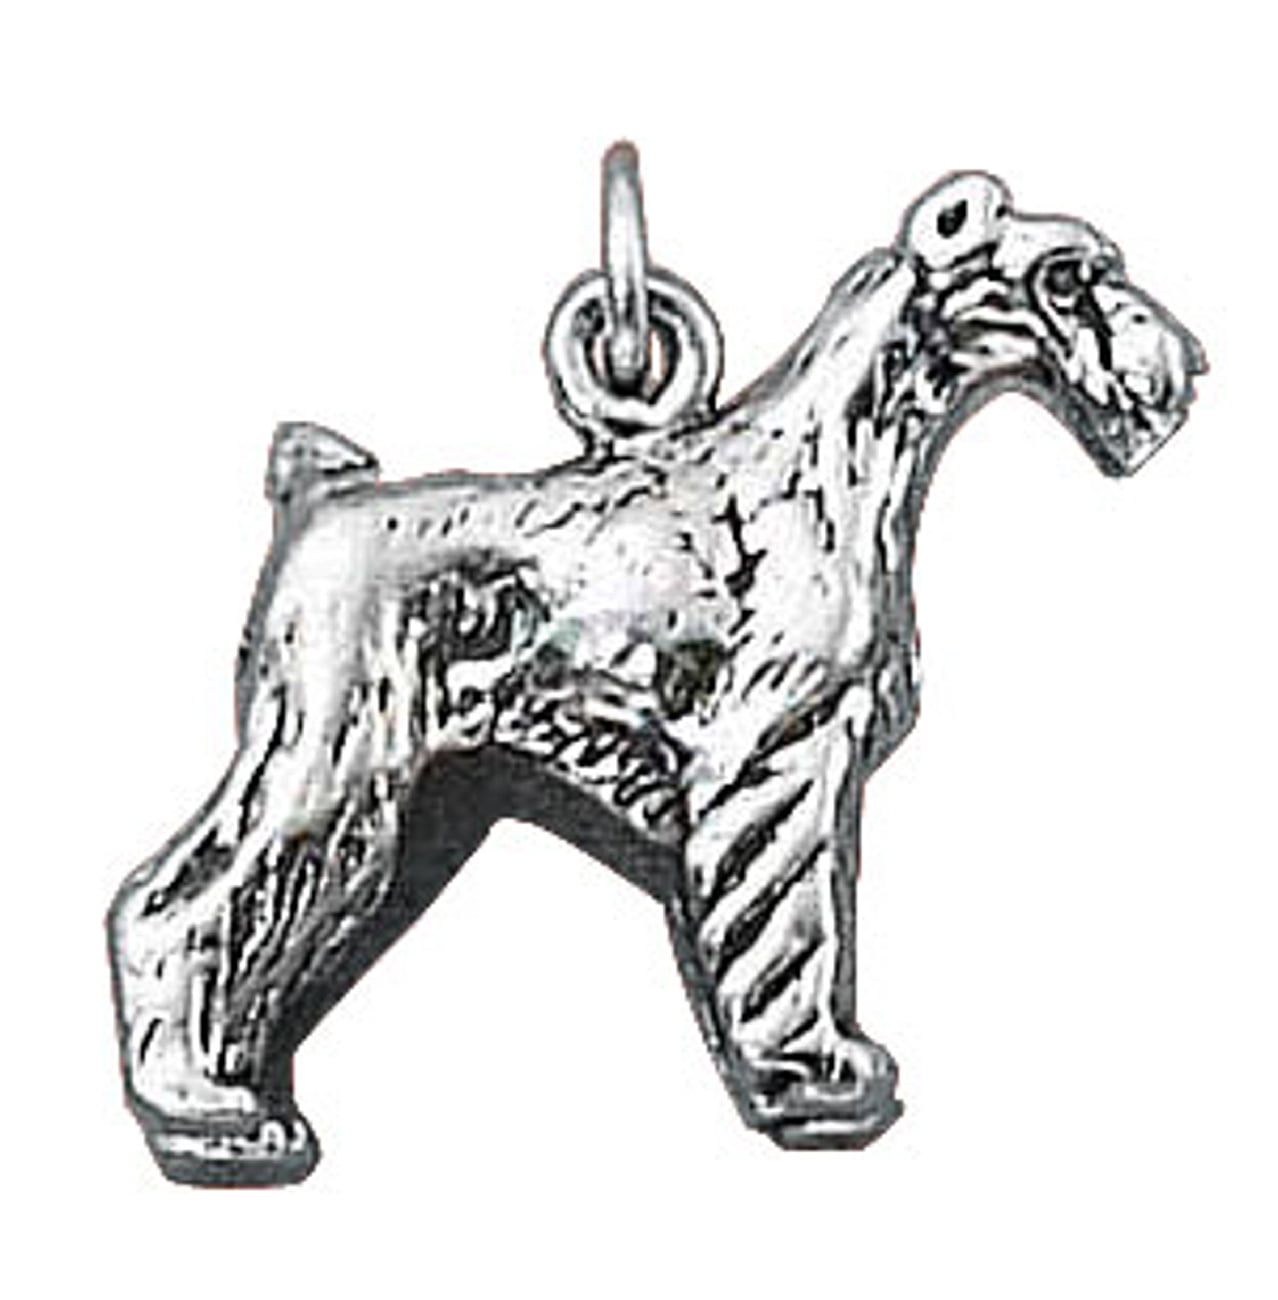 Sterling Silver 3D Schnauzer Dog Charm or Pendant